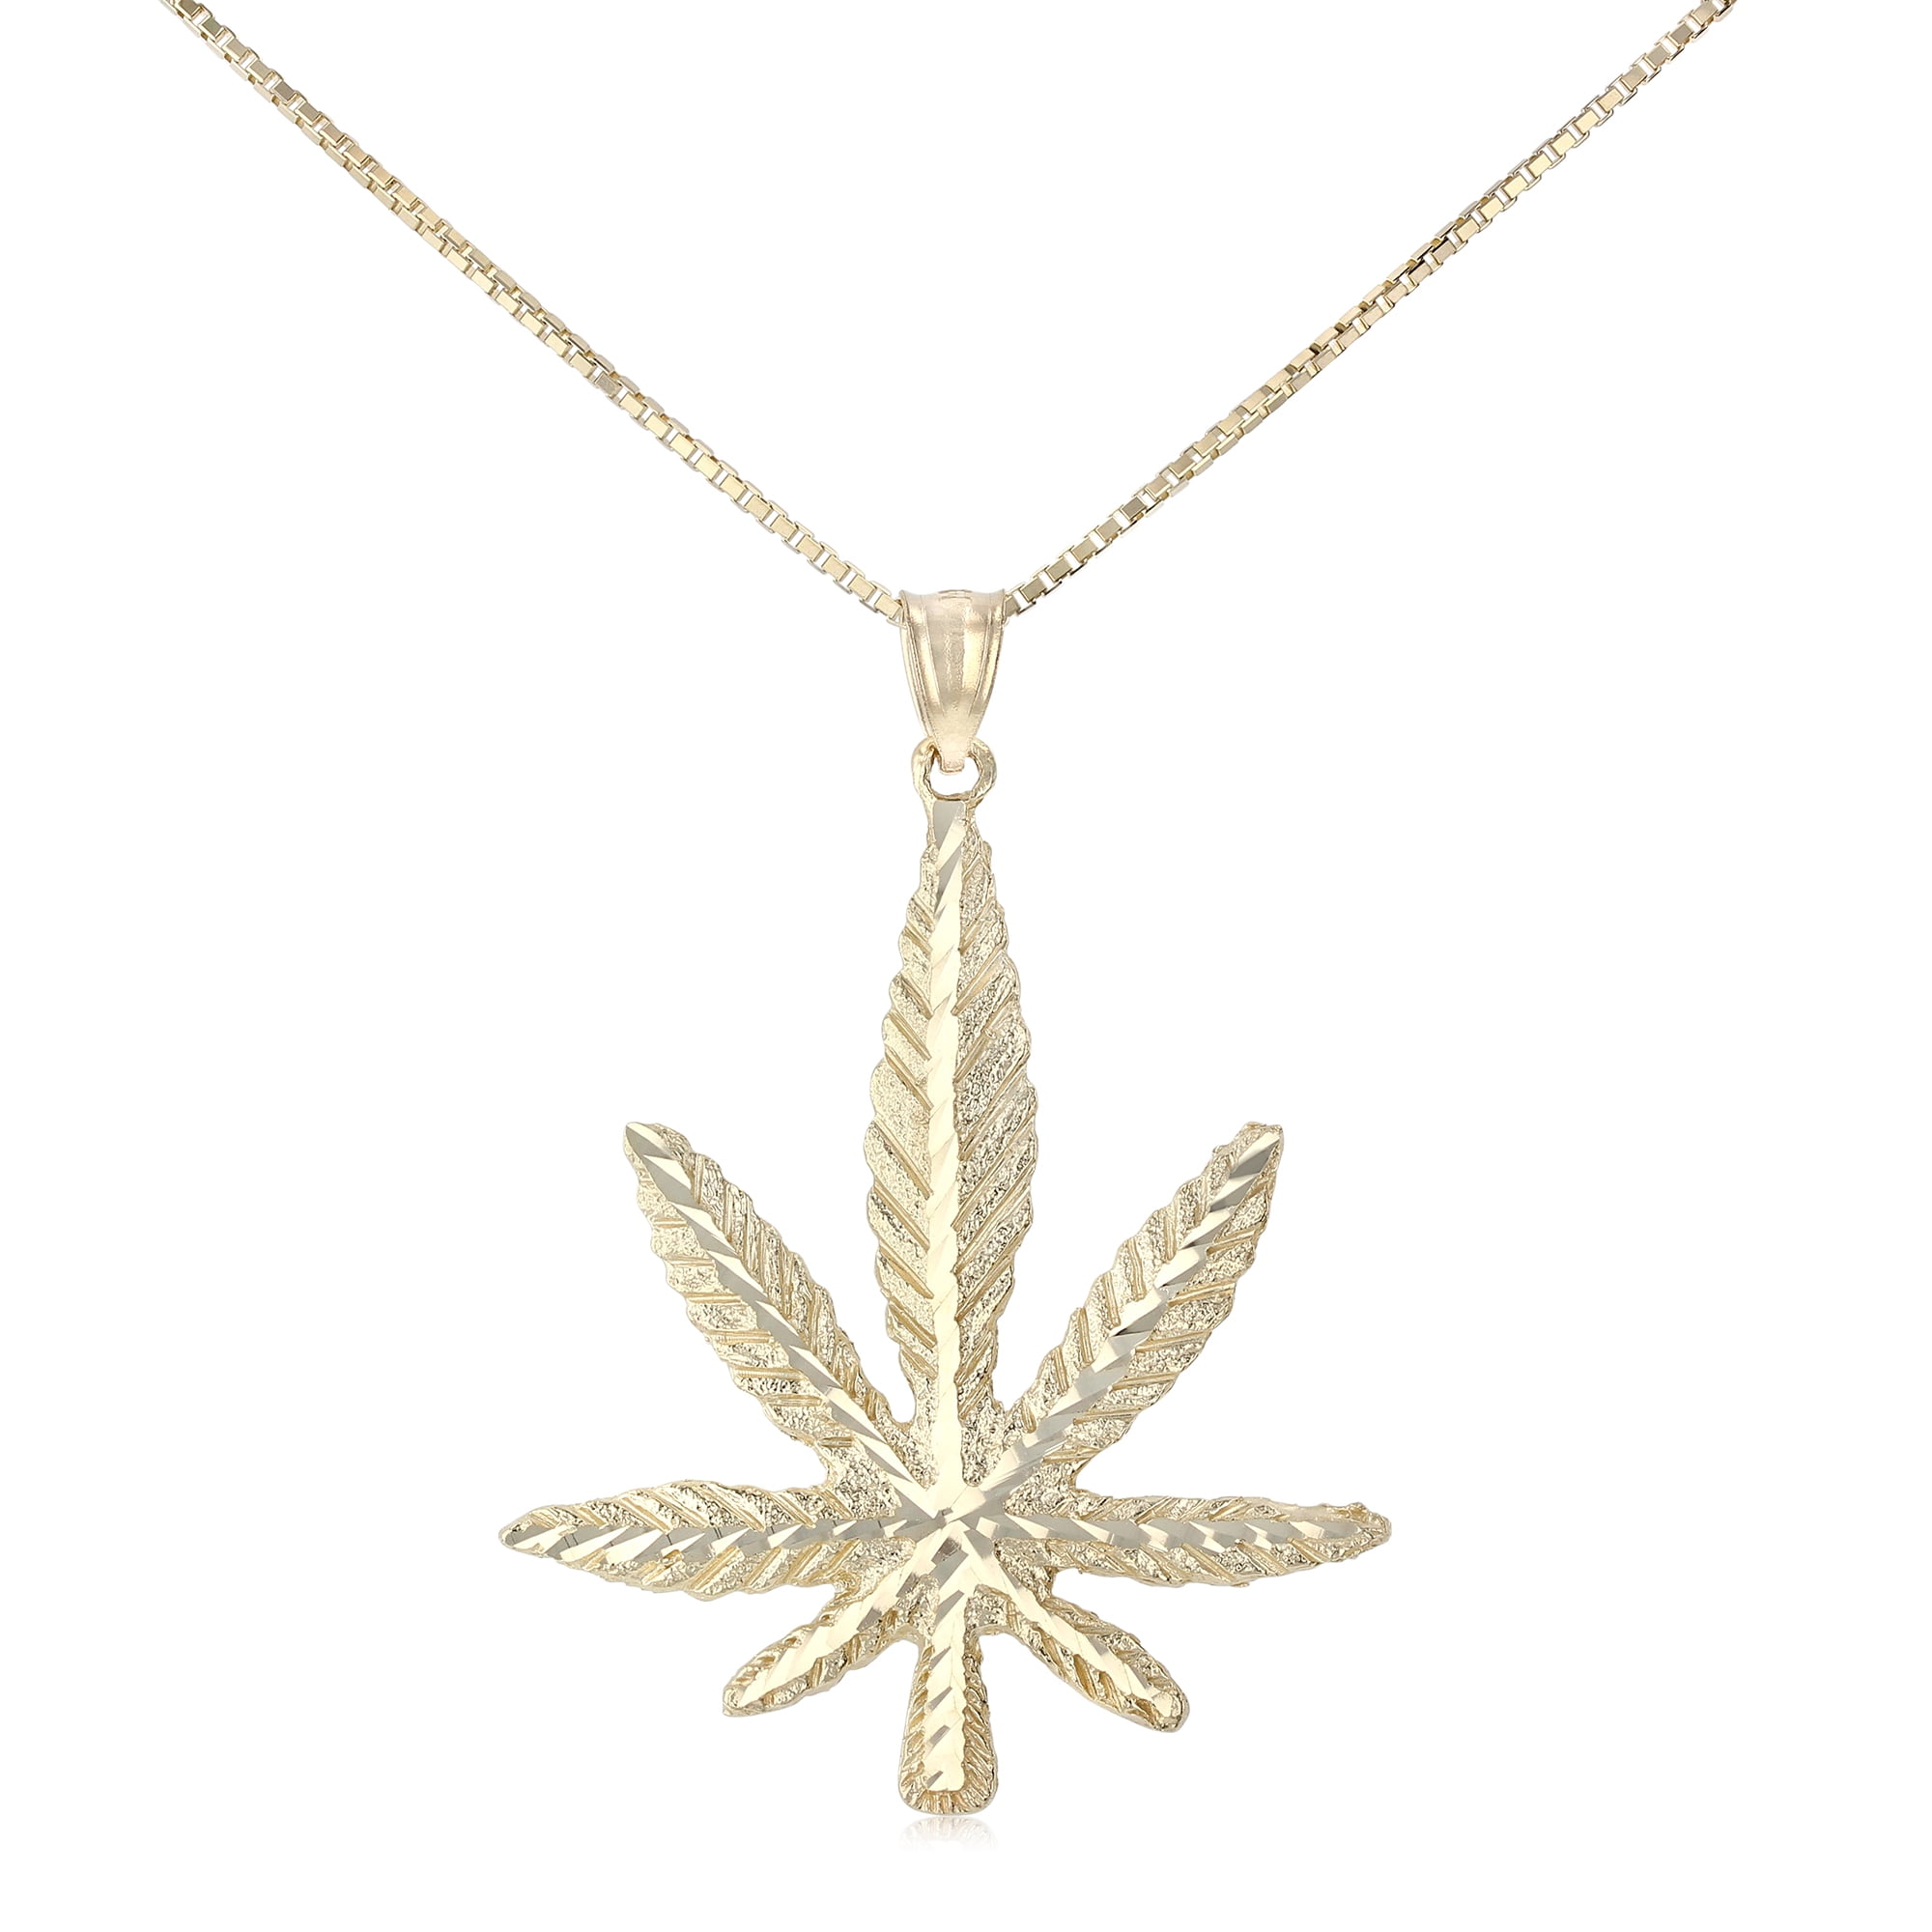 14K Yellow Gold Marijuana Leaf Charm Pendant with 1.2mm Singapore Chain Necklace